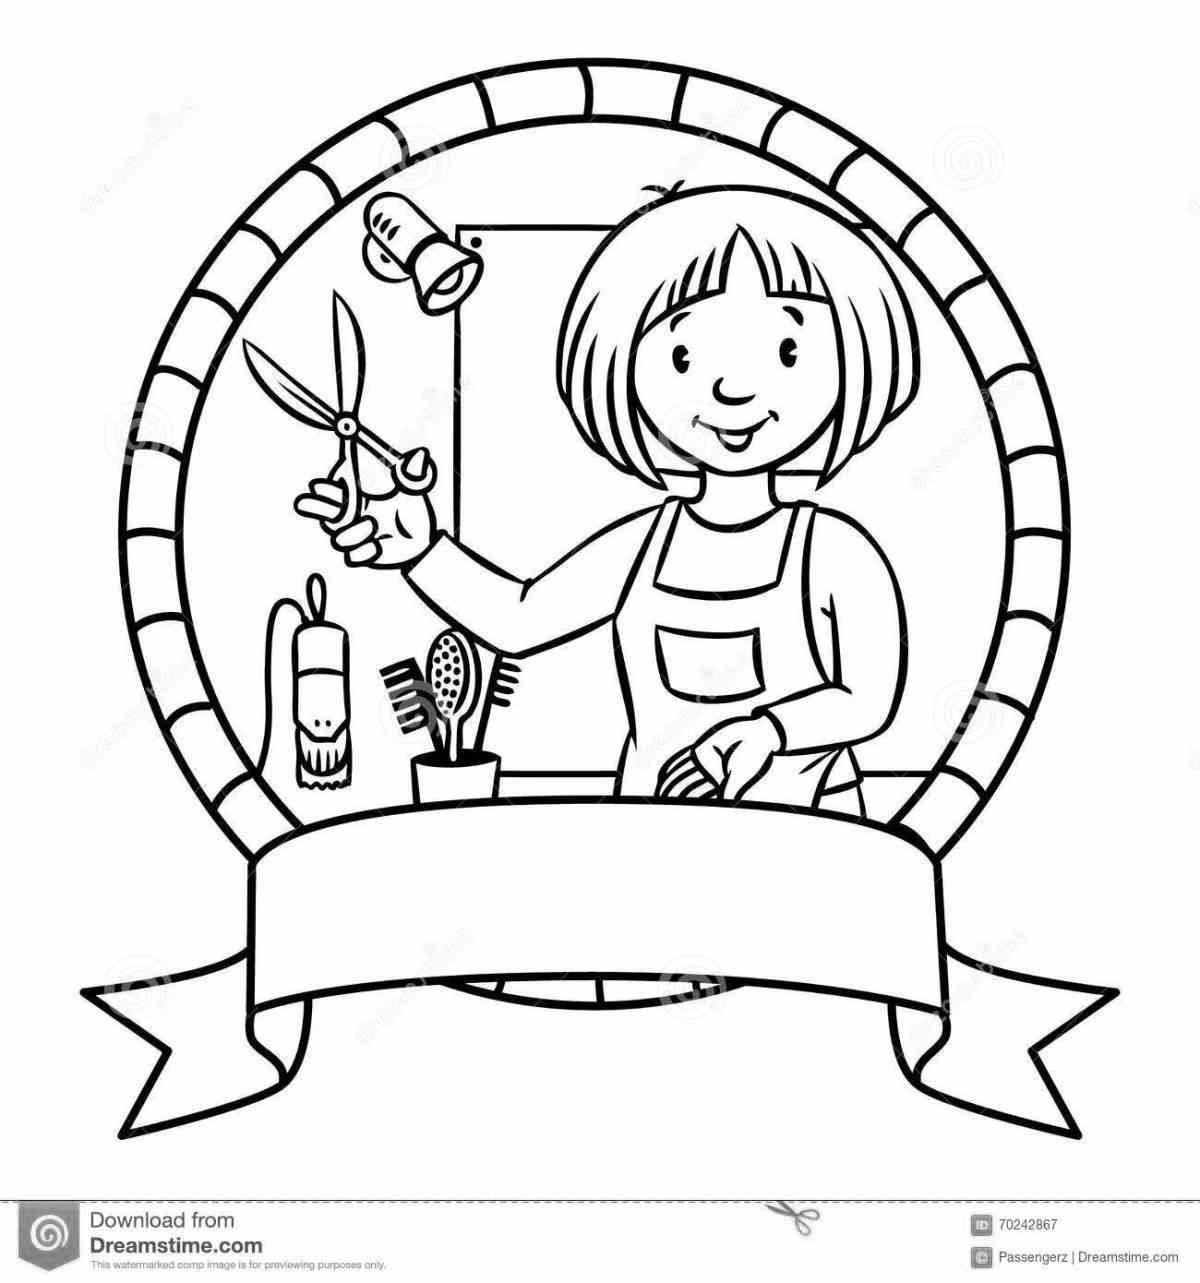 Colorful hairdresser coloring page for kids